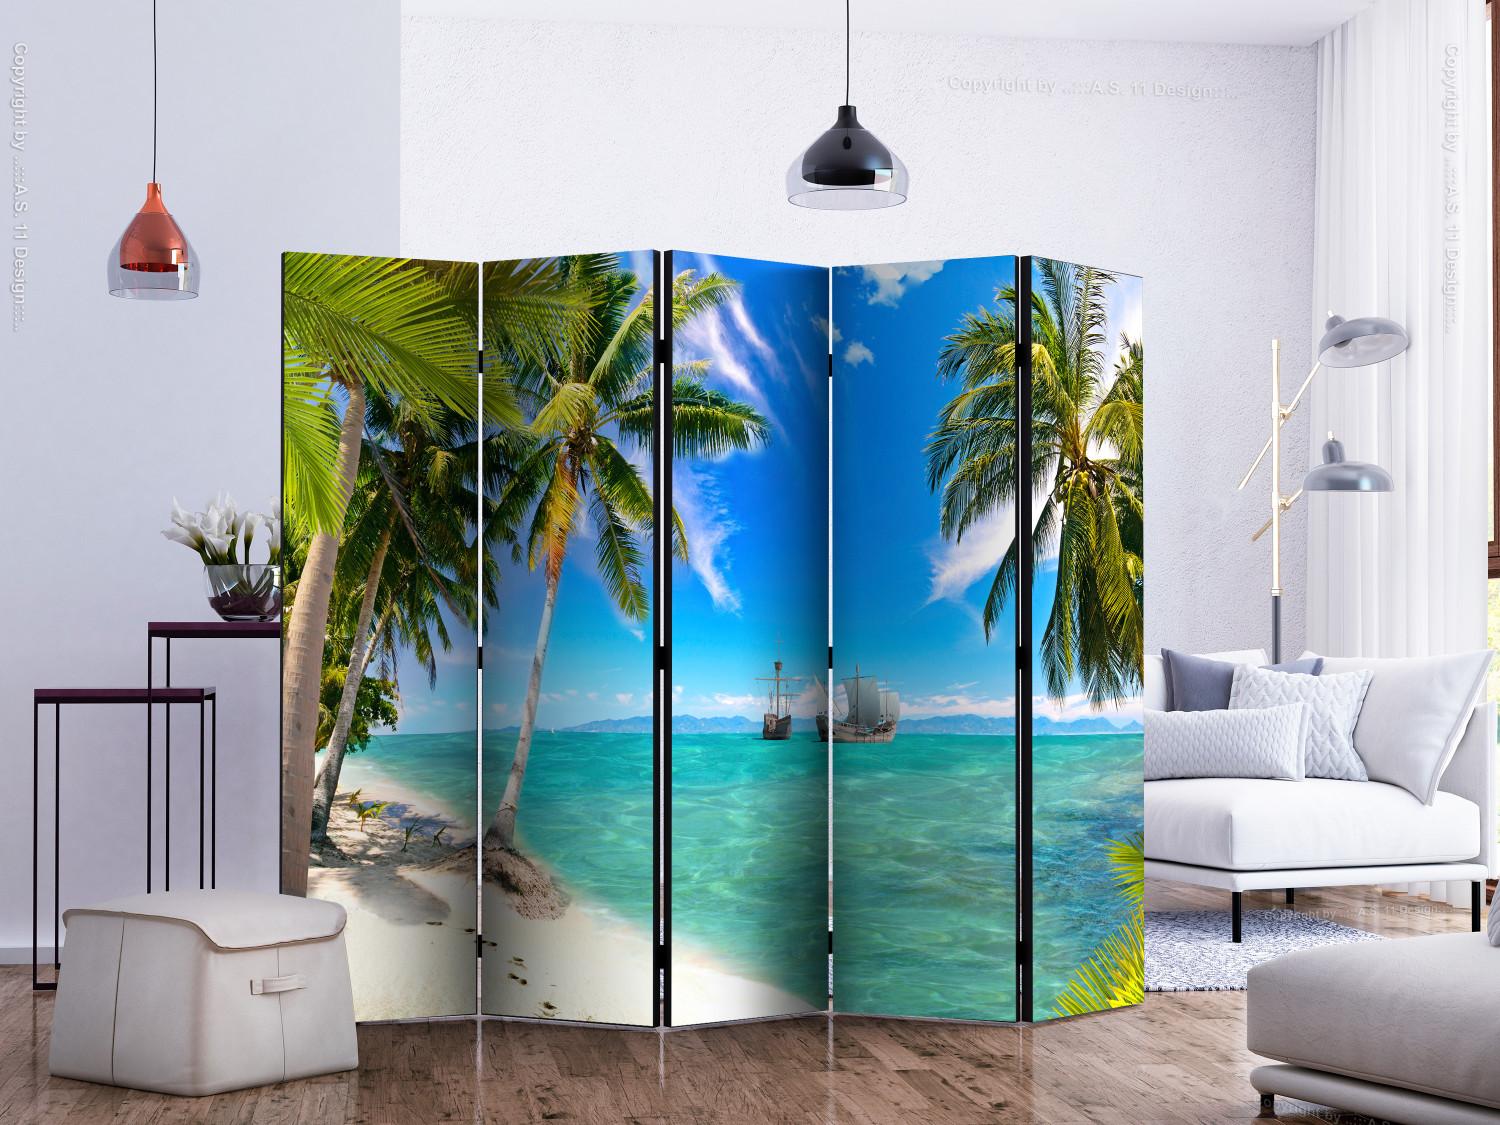 Room Divider Lost Ships II - beach and blue ocean landscape with ships